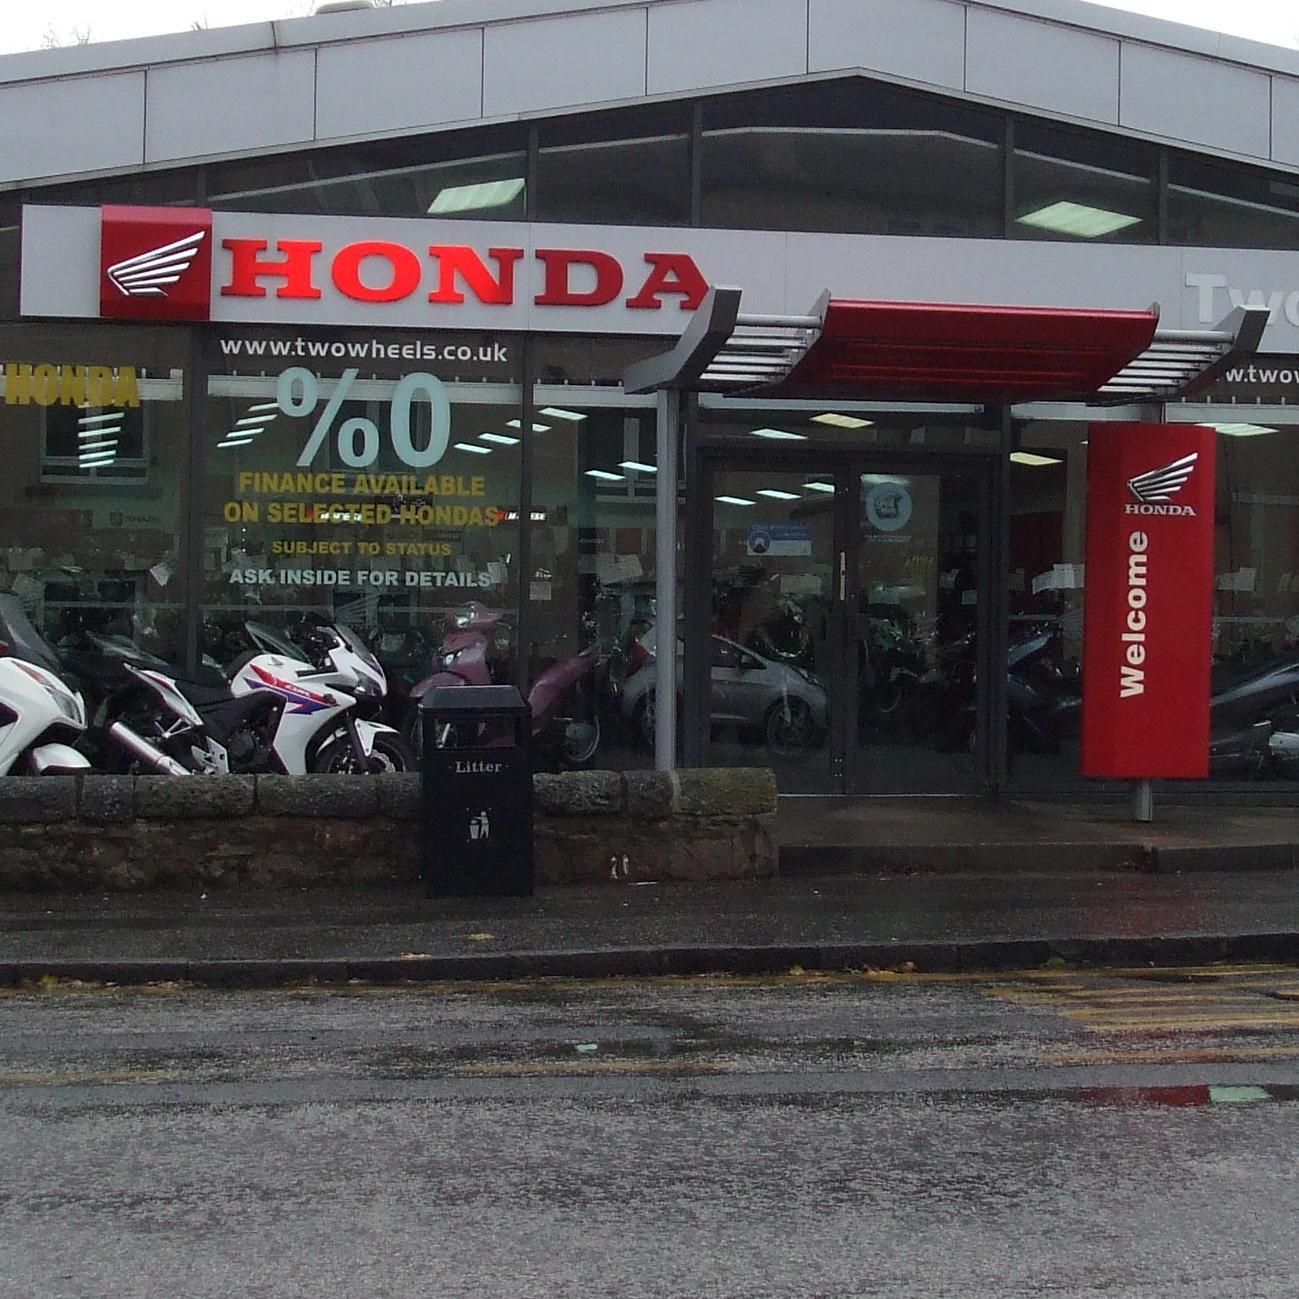 Two Wheels is Scotland's largest Honda motorcycle dealership, we offer a warm welcome and many years of motorcycling experience.